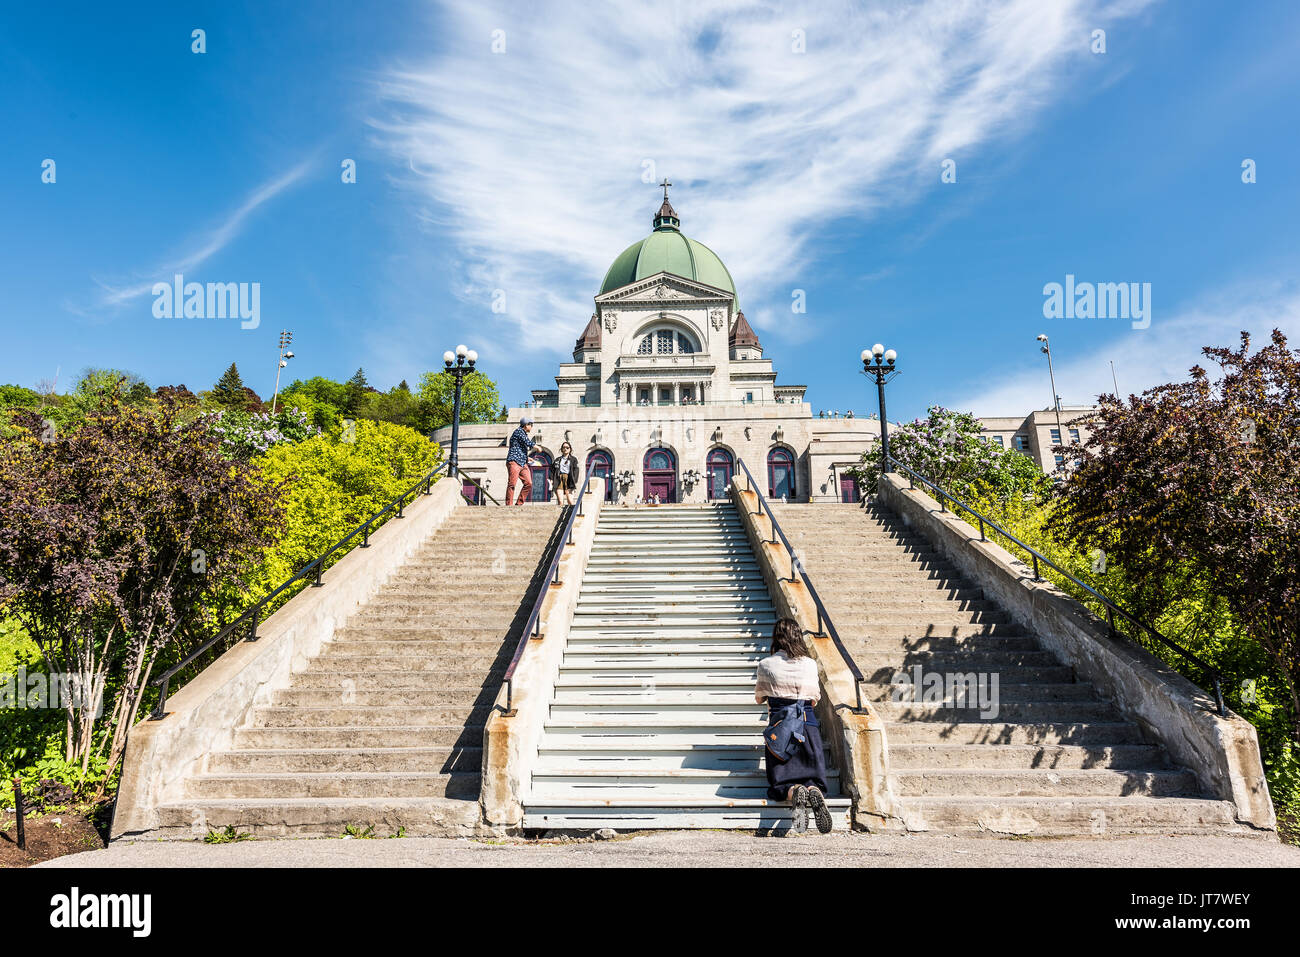 Montreal, Canada - May 28, 2017: St Joseph's Oratory on Mont Royal with woman praying on steps in Quebec region city Stock Photo